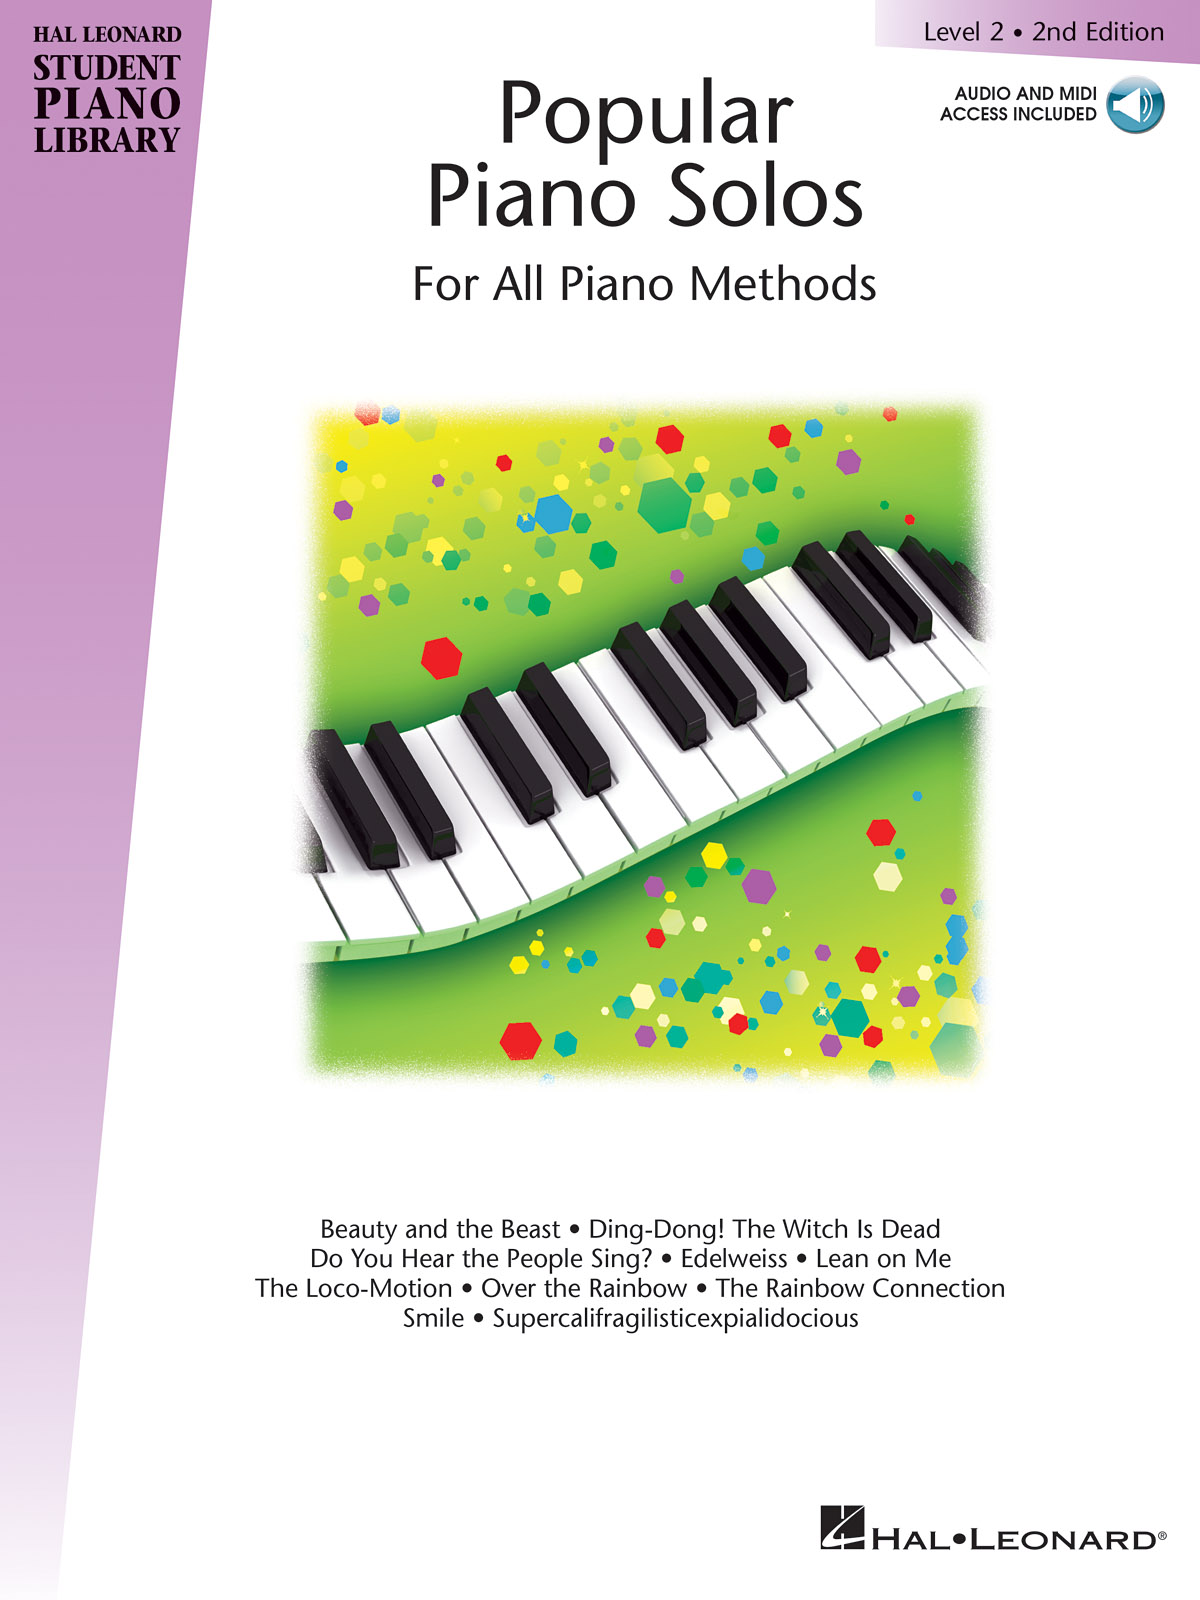 Popular Piano Solos 2nd Edition - Level 2 - Hal Leonard Student Piano Library - noty pro děti